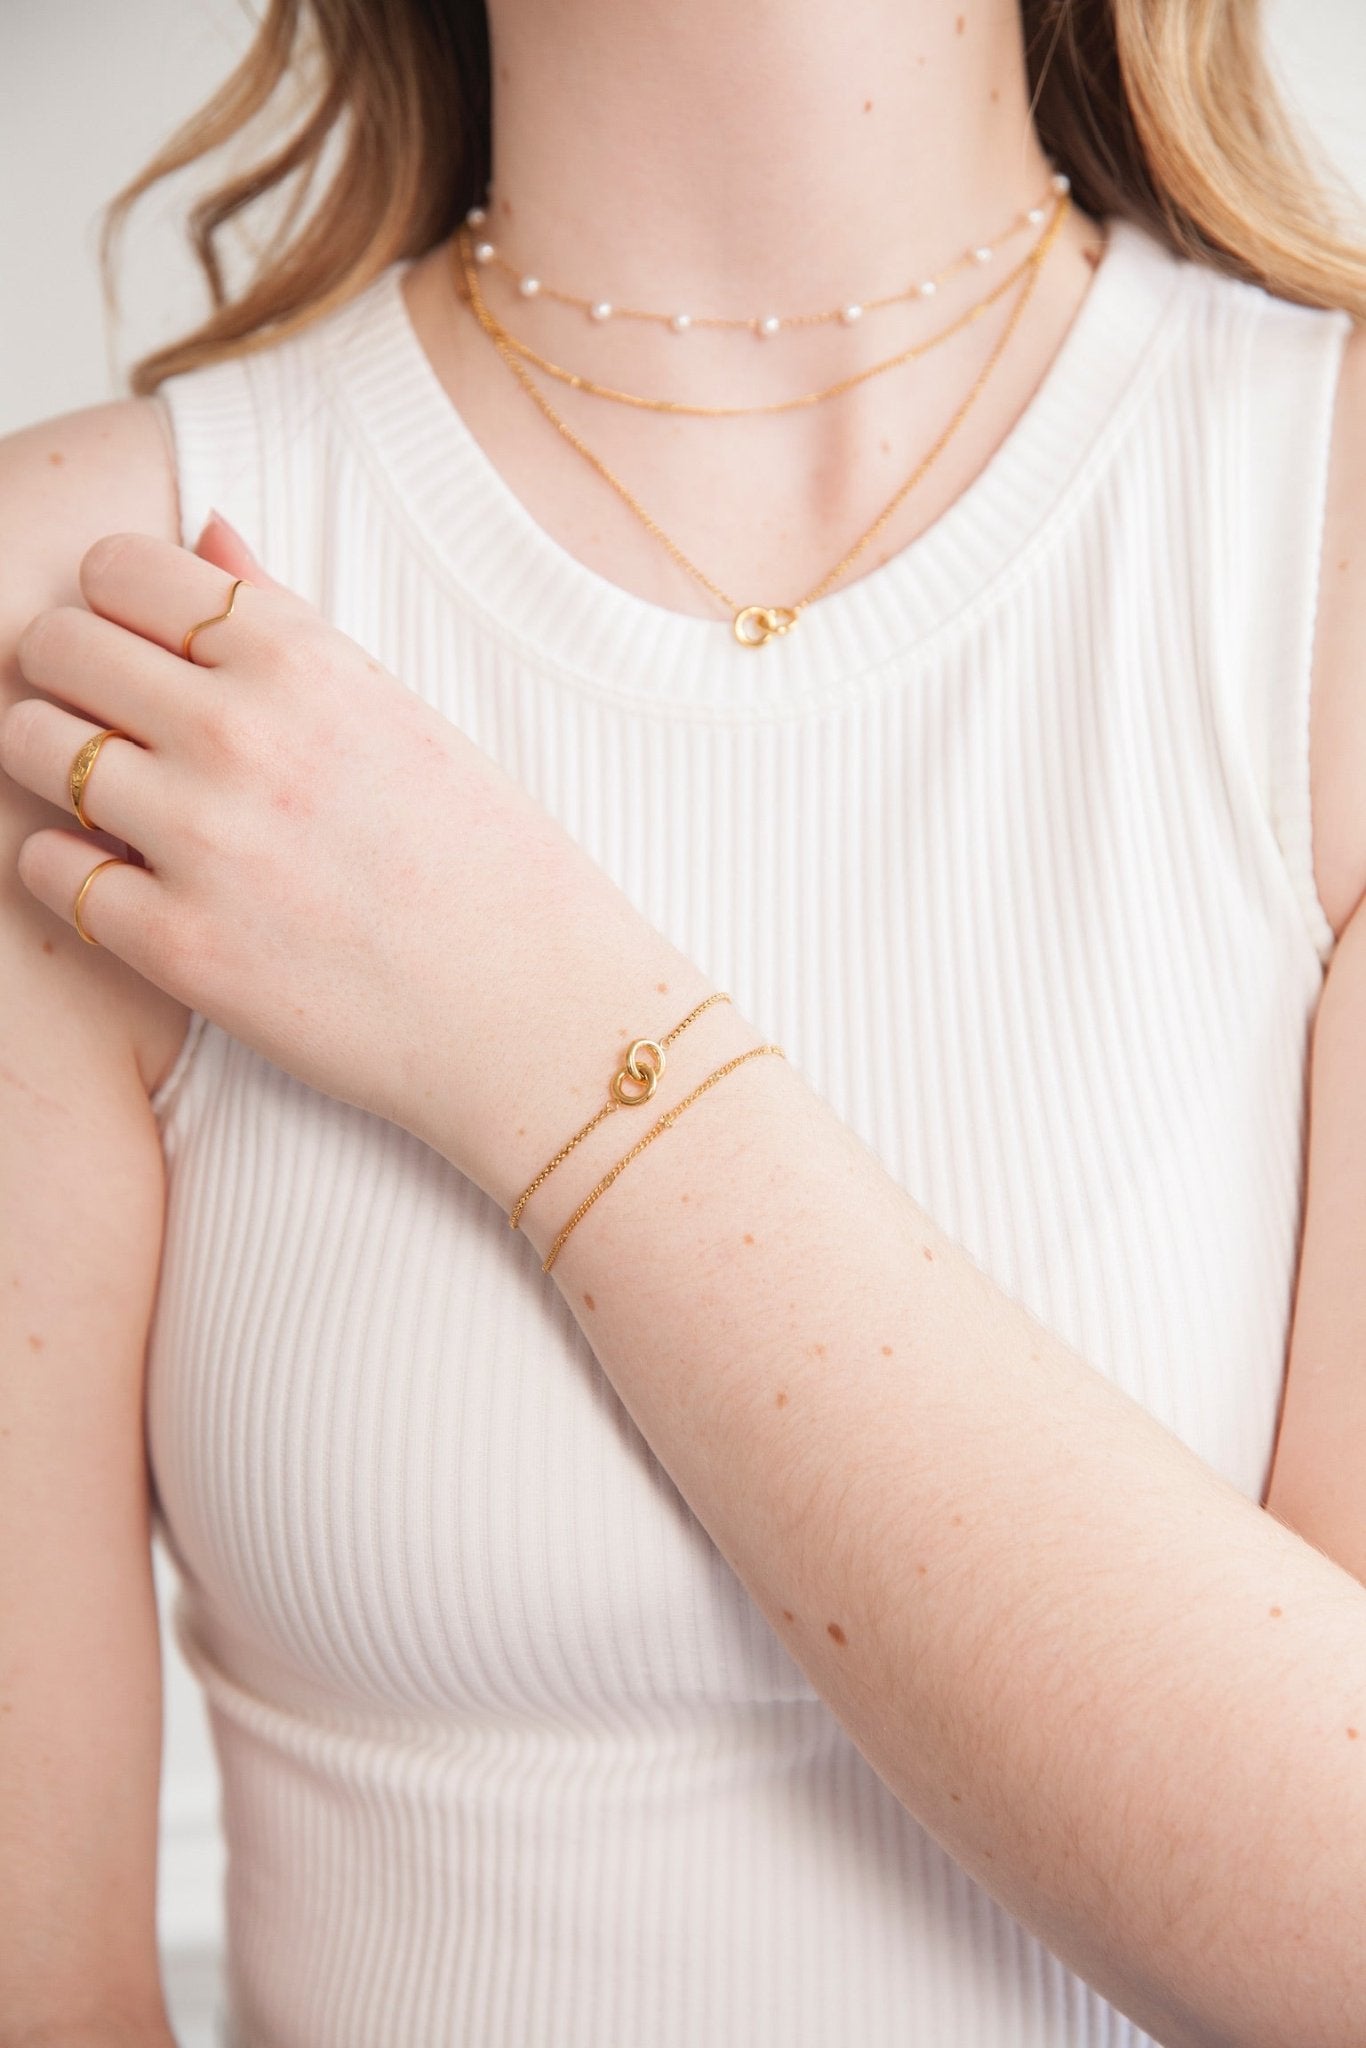 Twin Souls Bracelet in Gold - Flaire & Co.